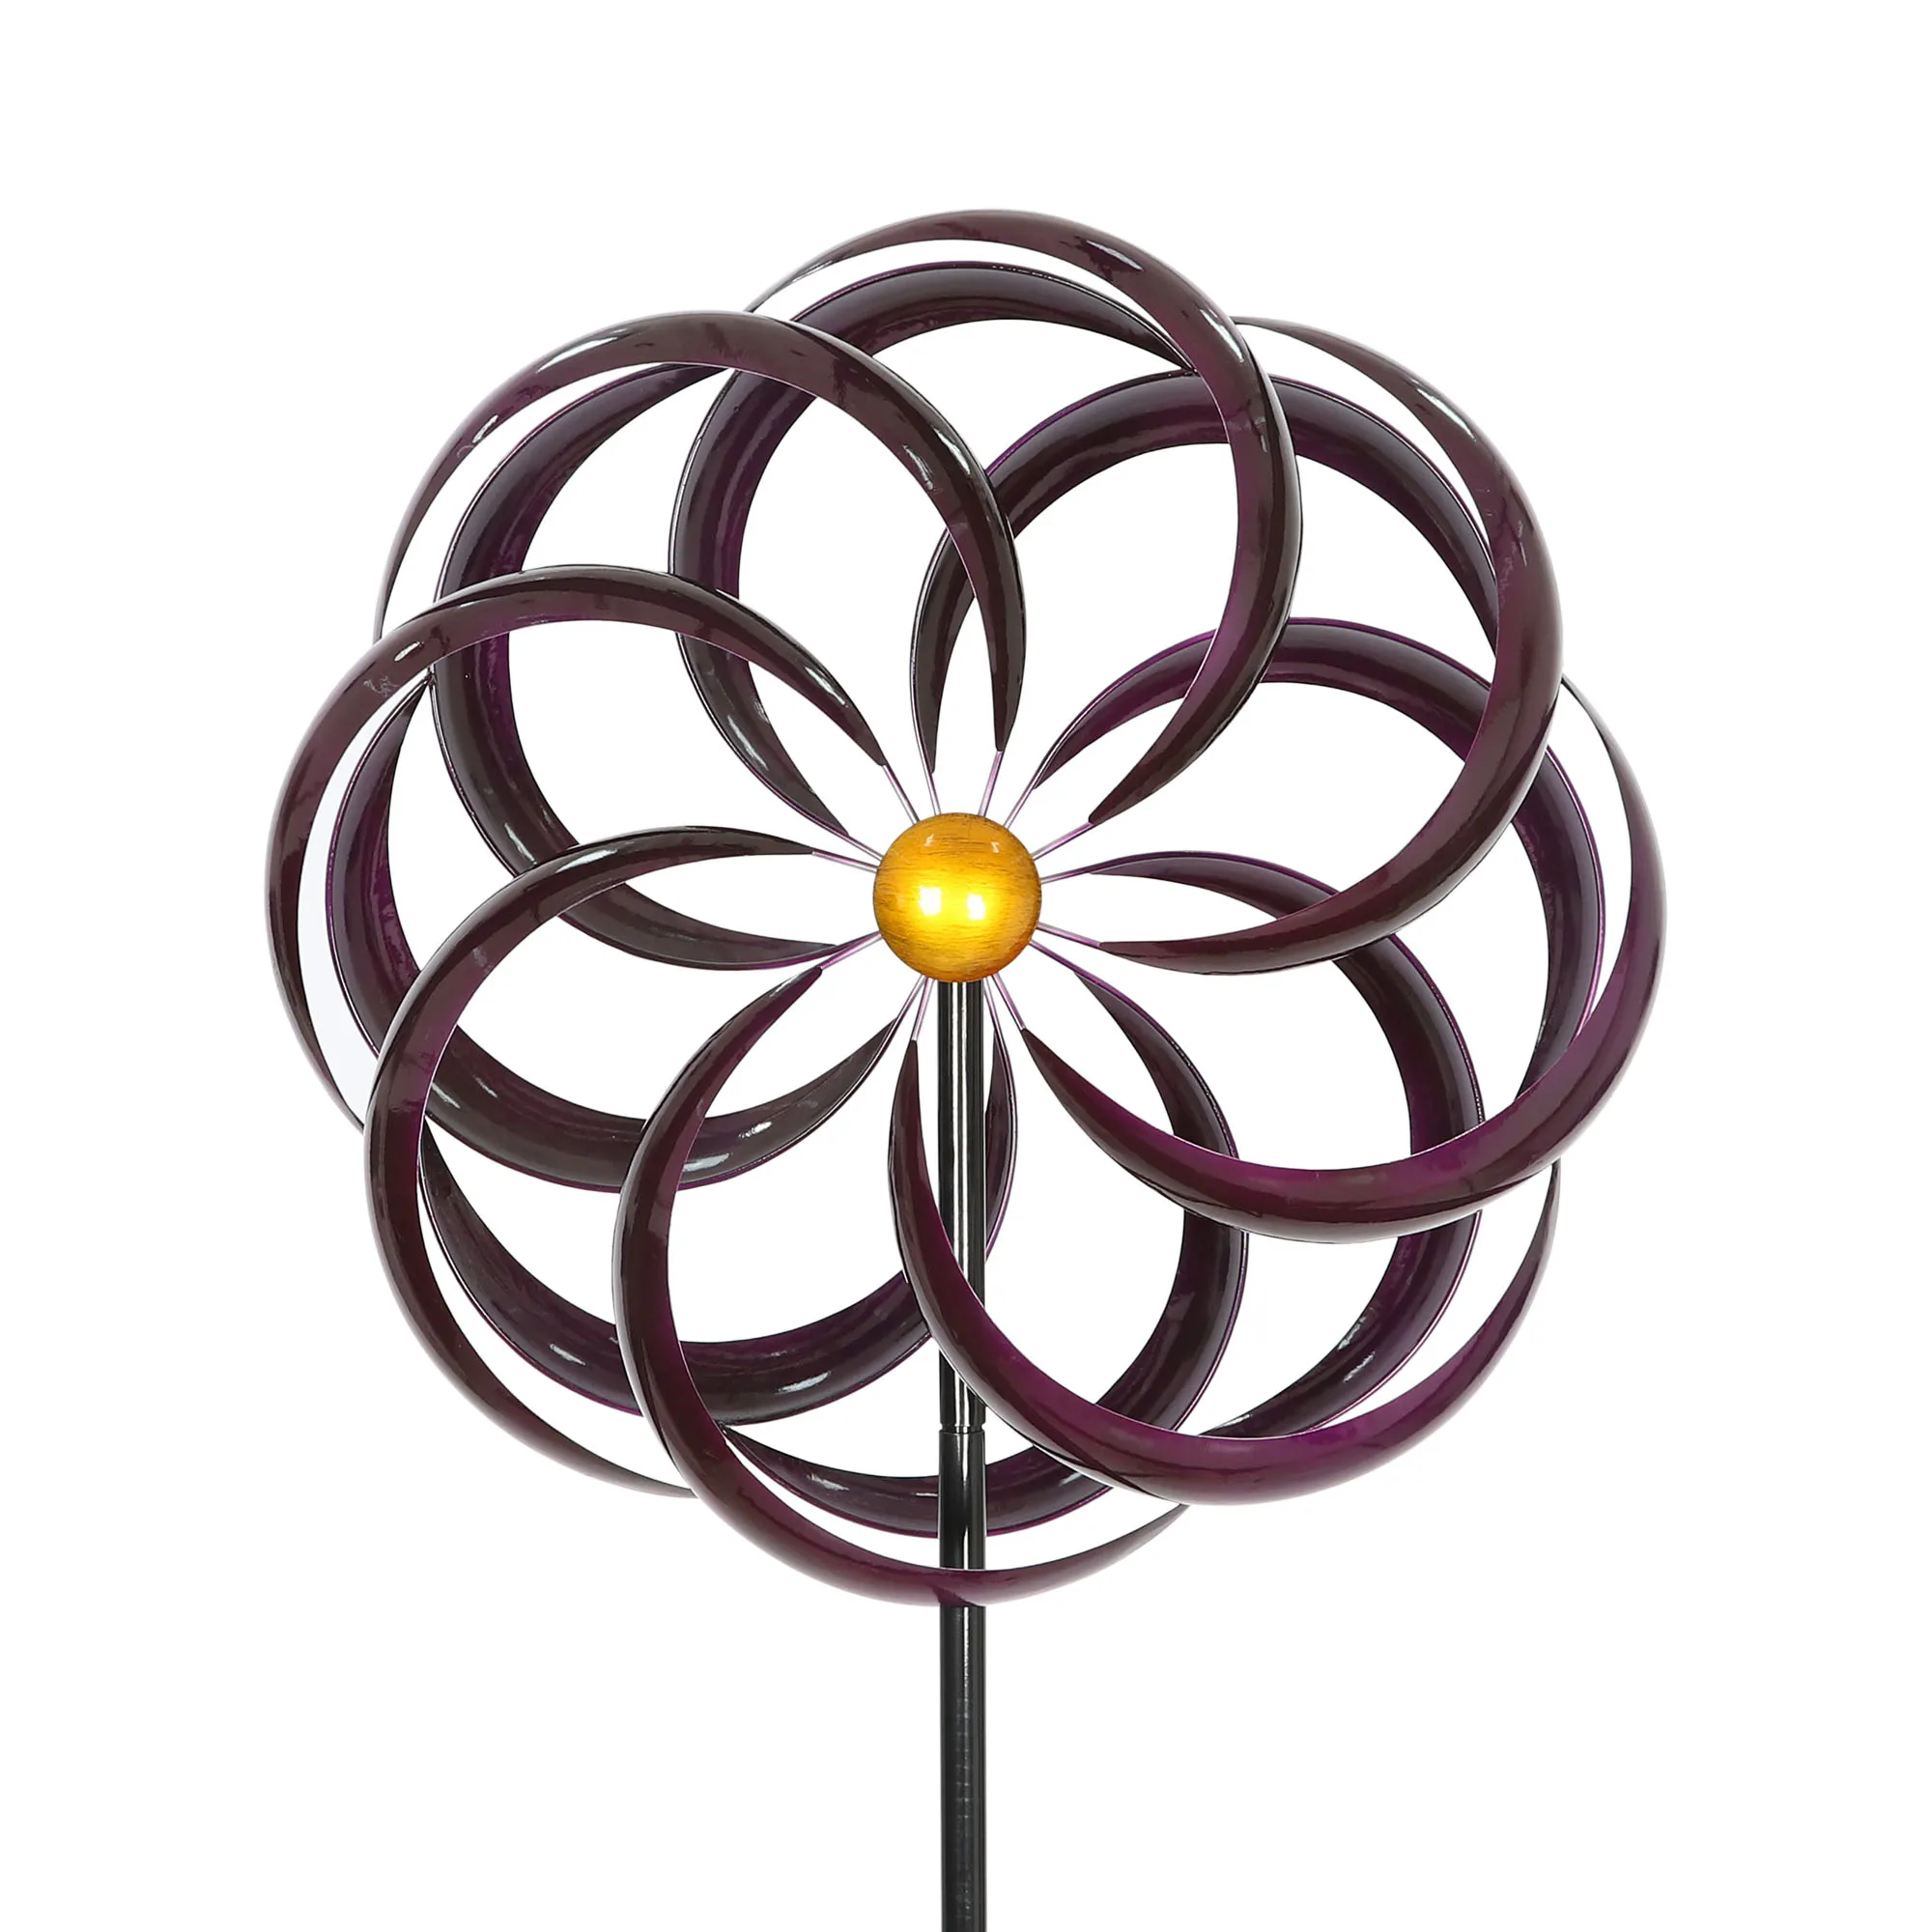 New Purple Design Blade 360 Rotation Garden Color Windmill Outdoor Wind Spinner with Metal Stake